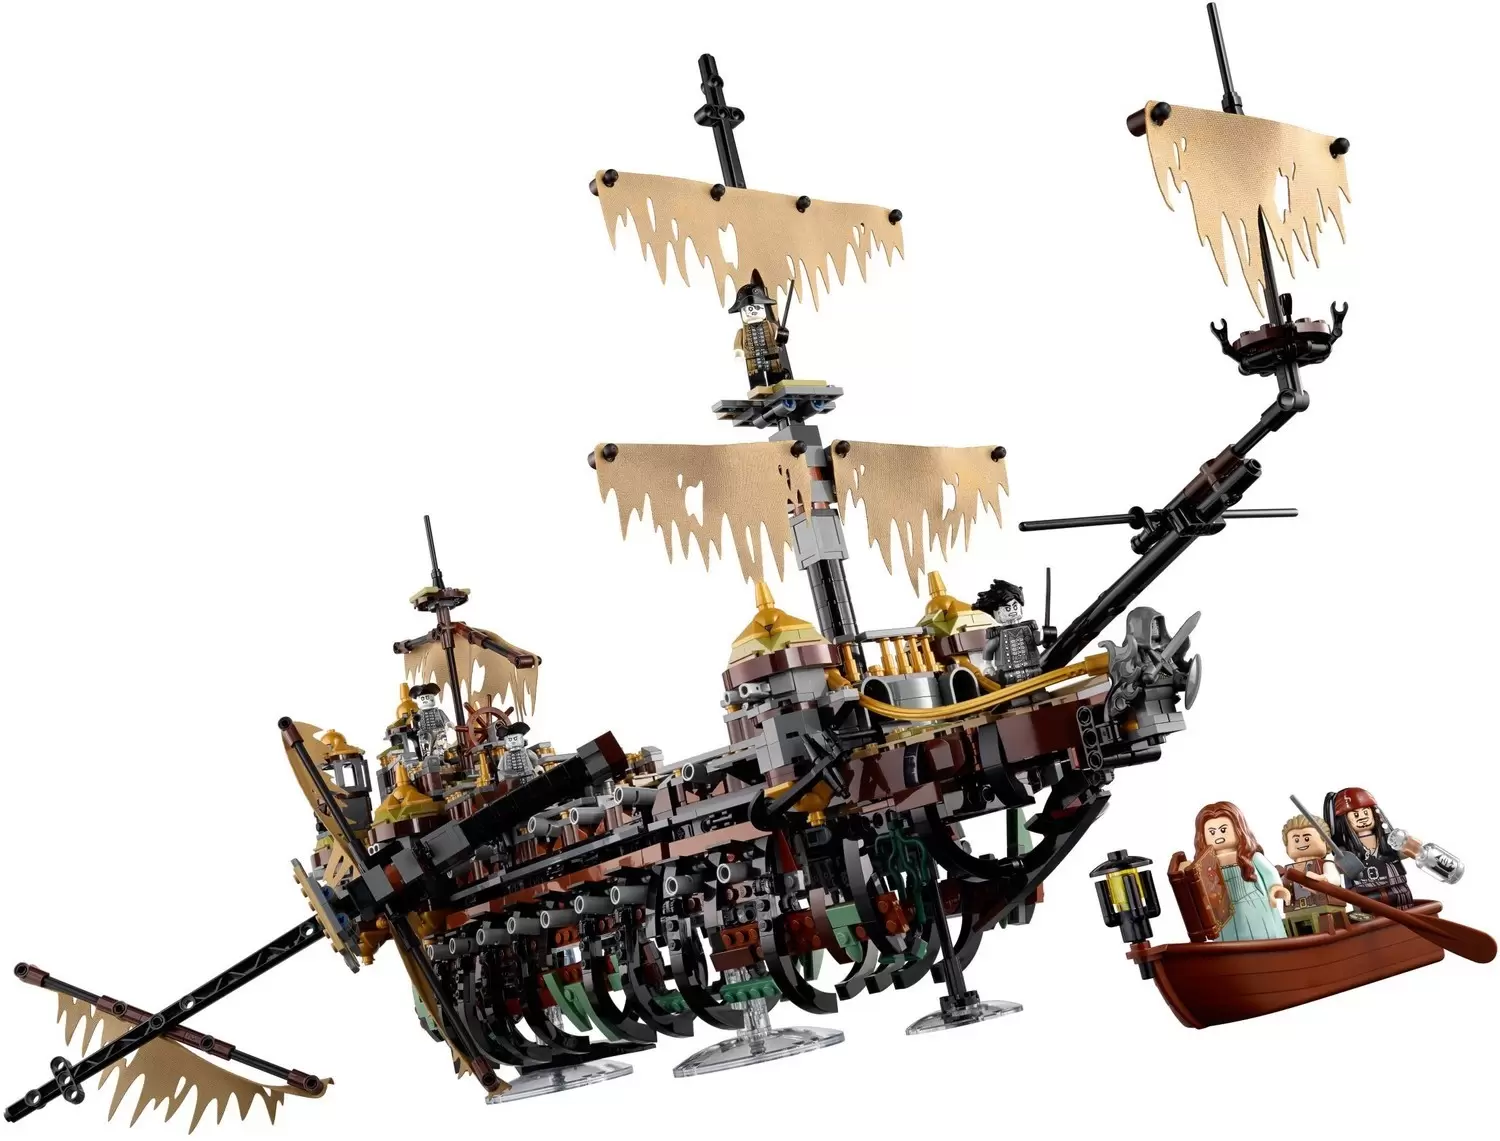 LEGO Pirates of the Caribbean - Silent Mary